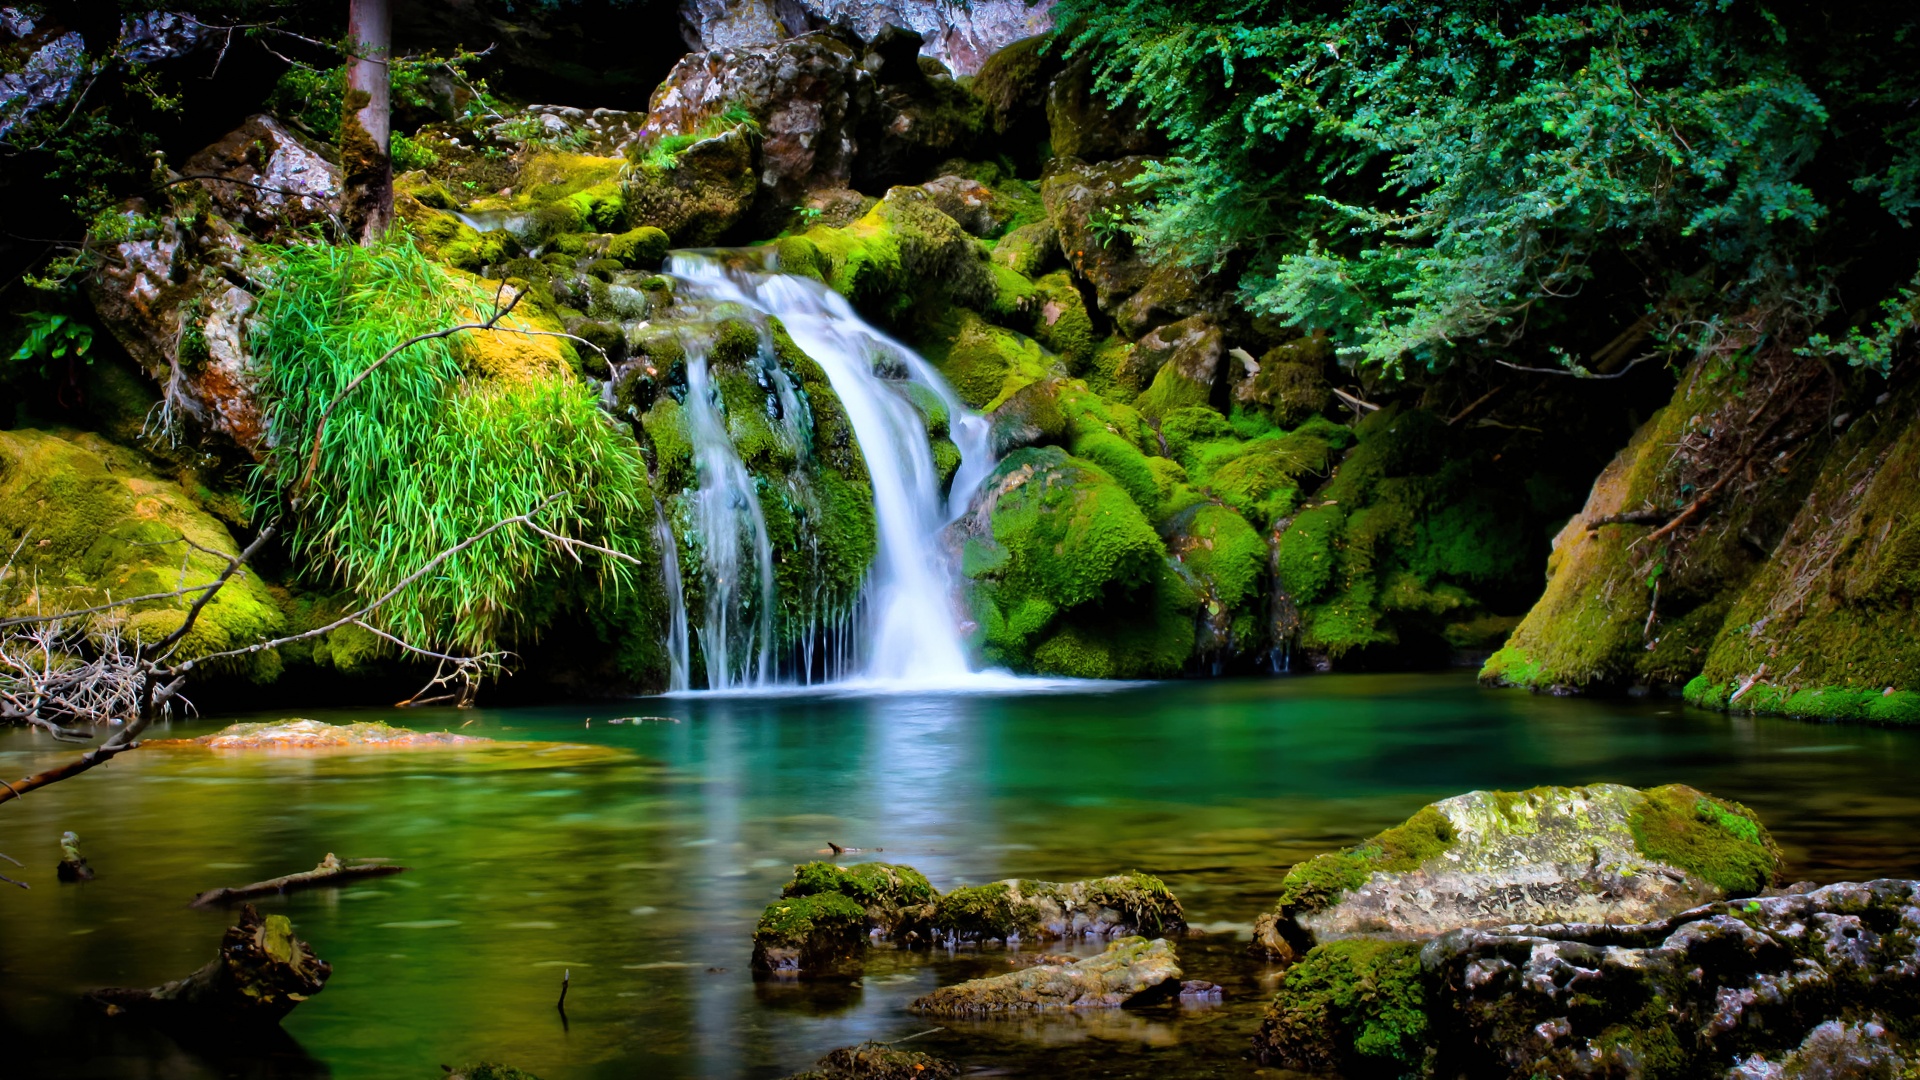 Free Waterfall In Deep Forest Photos and Vectors